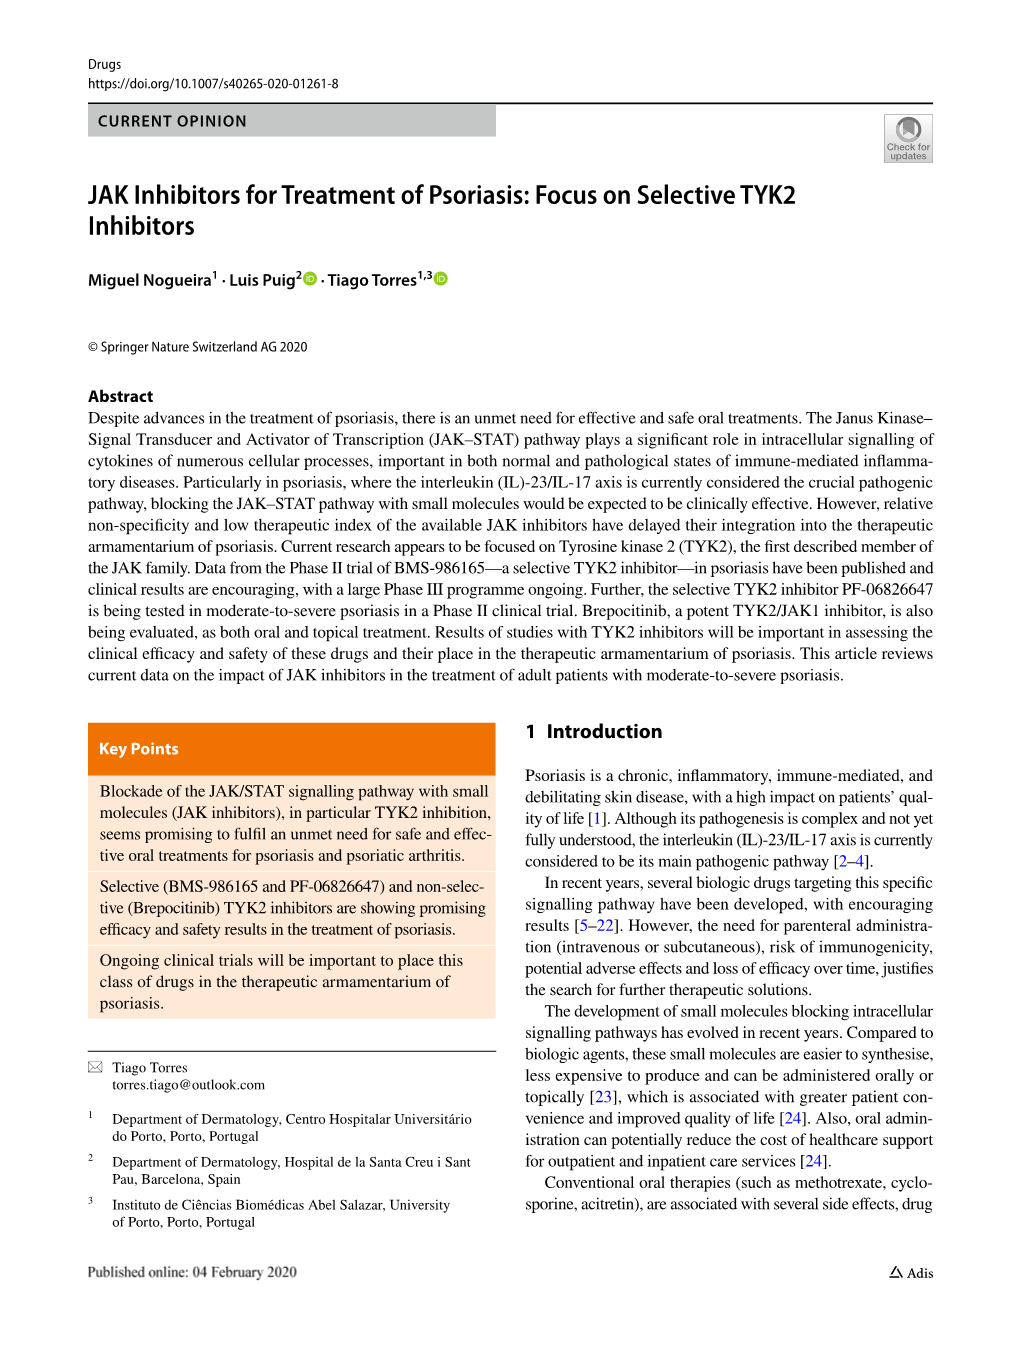 JAK Inhibitors for Treatment of Psoriasis: Focus on Selective TYK2 Inhibitors